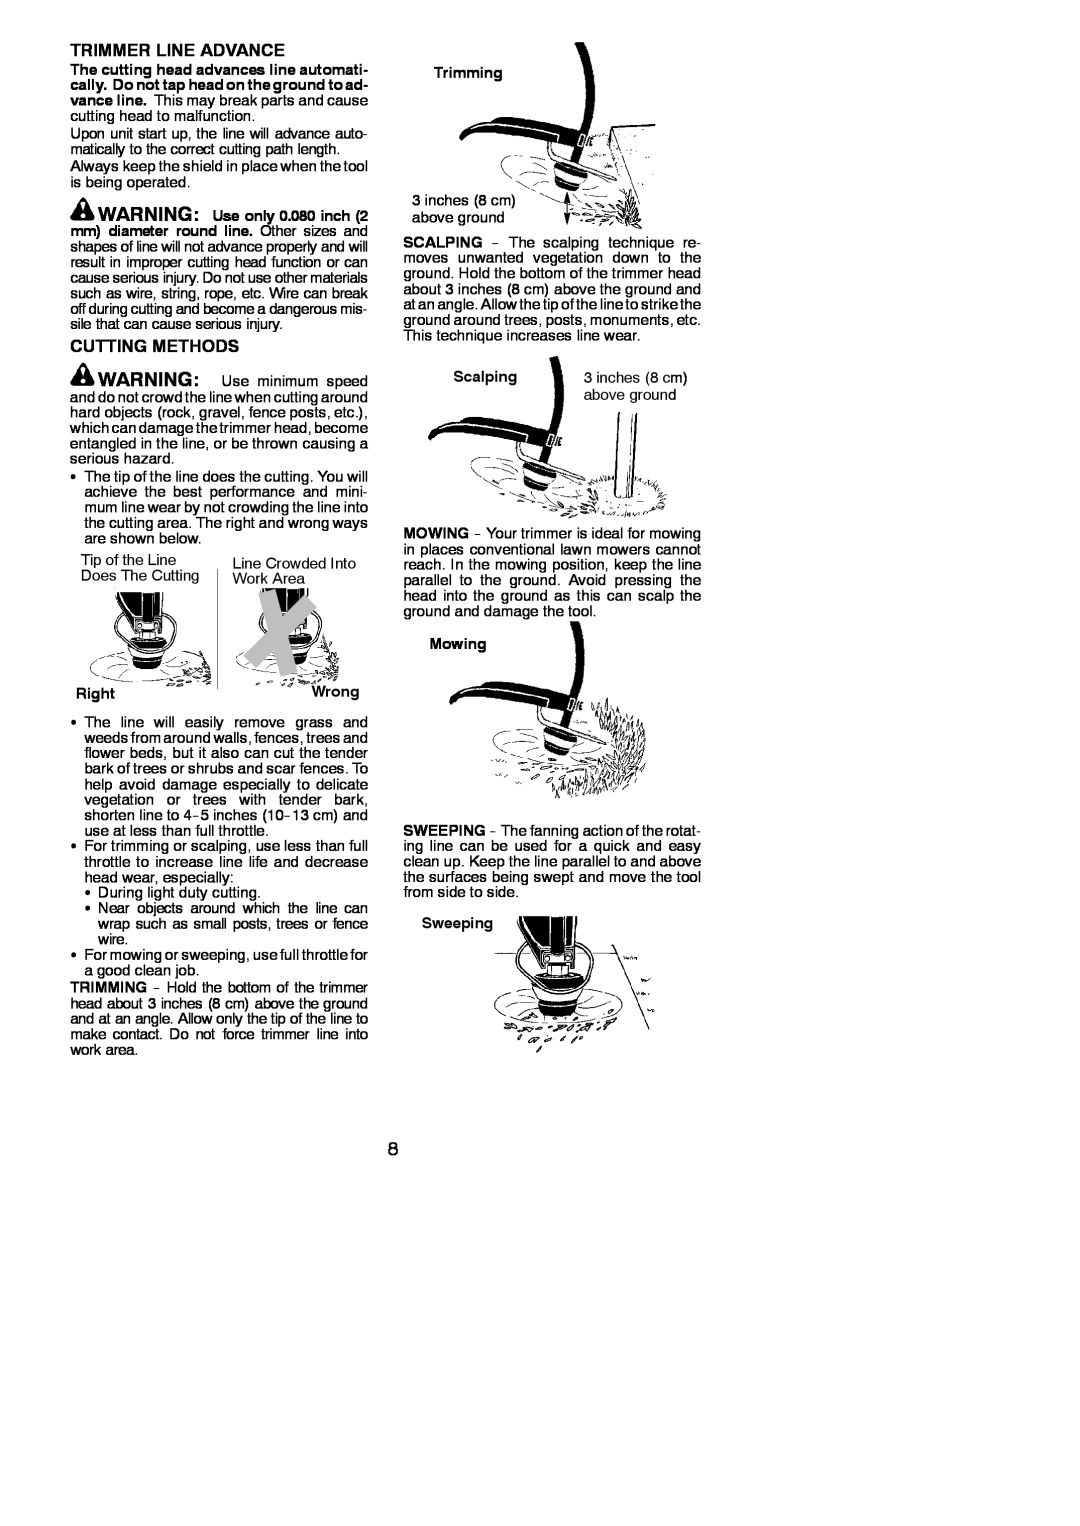 Poulan 952711932 Trimmer Line Advance, Cutting Methods, WARNING Use only 0.080 inch, RightWrong, Trimming, Scalping 